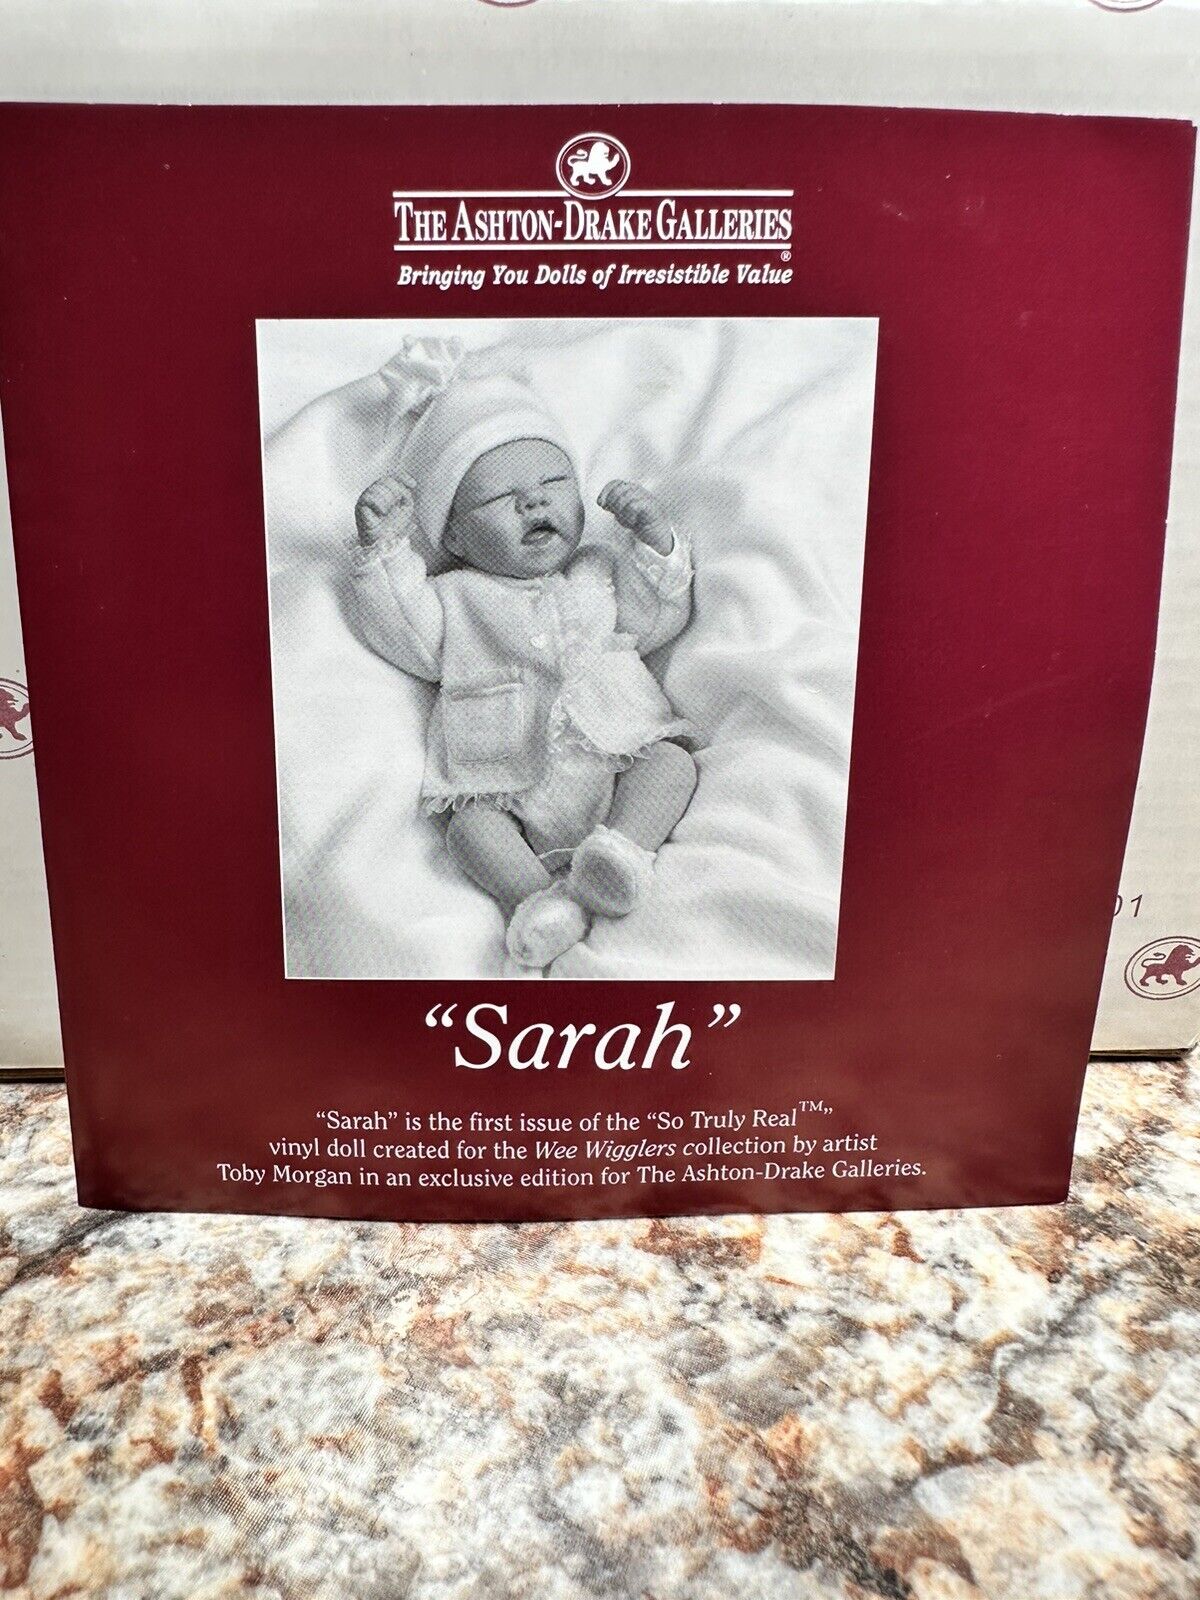 Ashton-Drake Galleries. “Sarah” First Issue Of The “So Truly Real” Exclusive